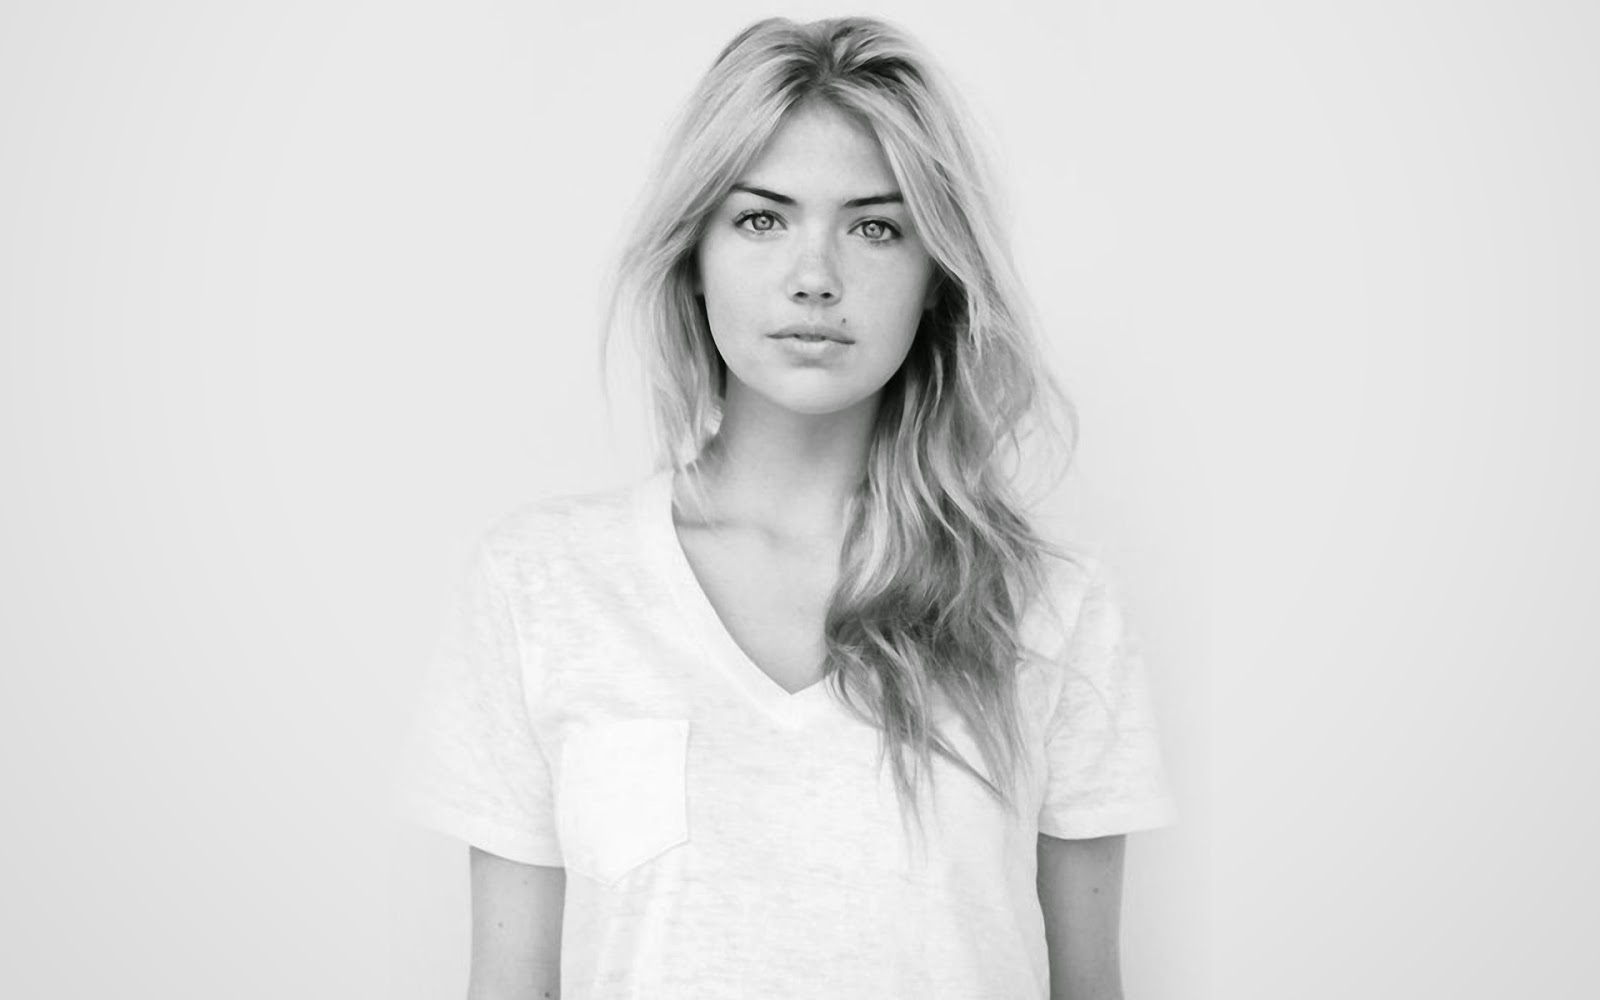 Kate Upton High Definition Wallpaper On